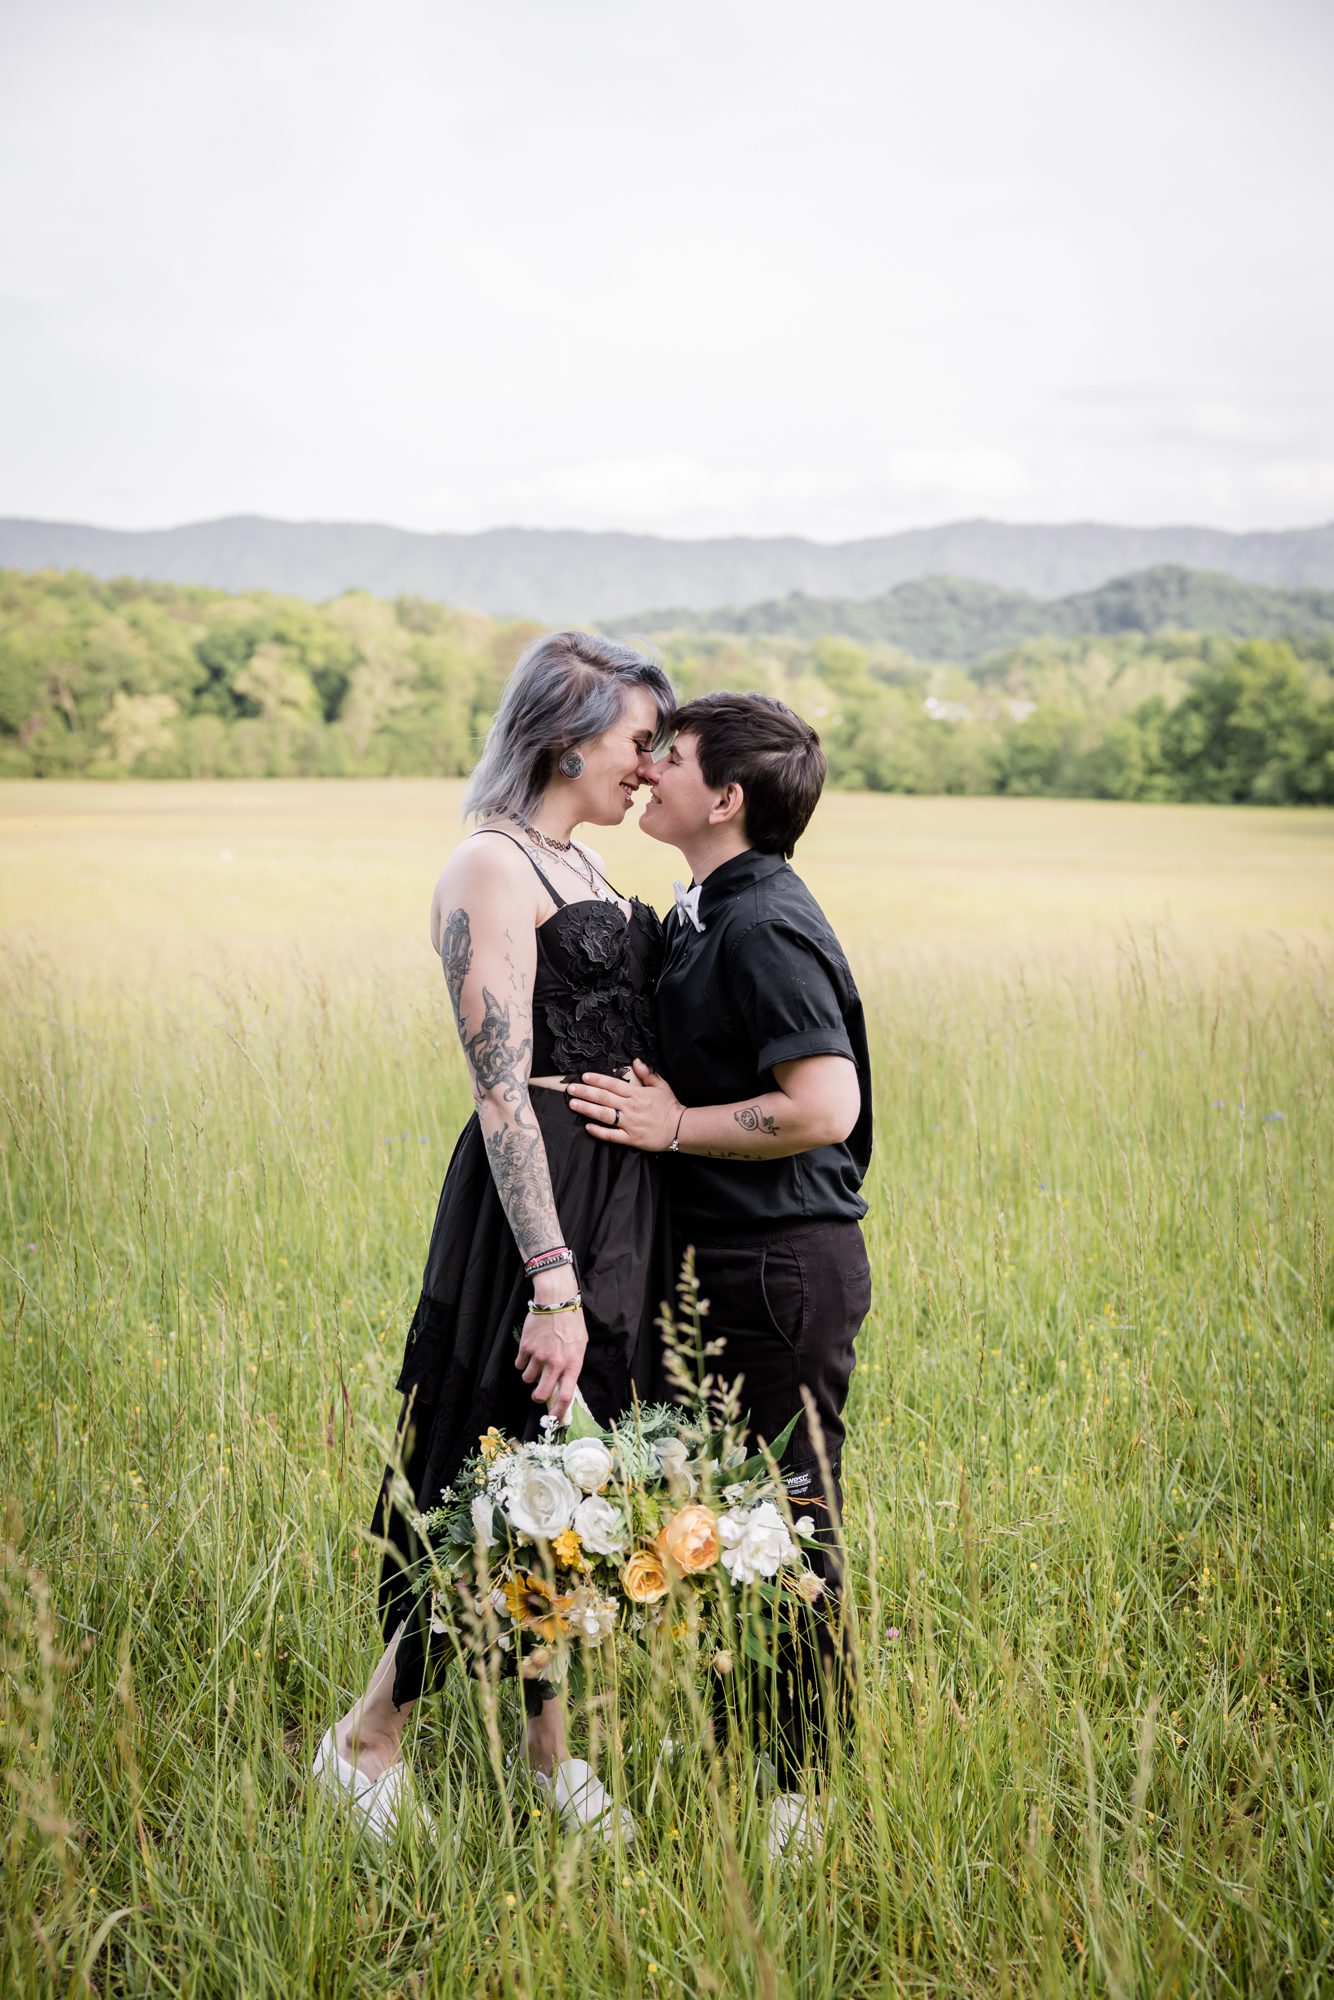 Elopement in the Forest